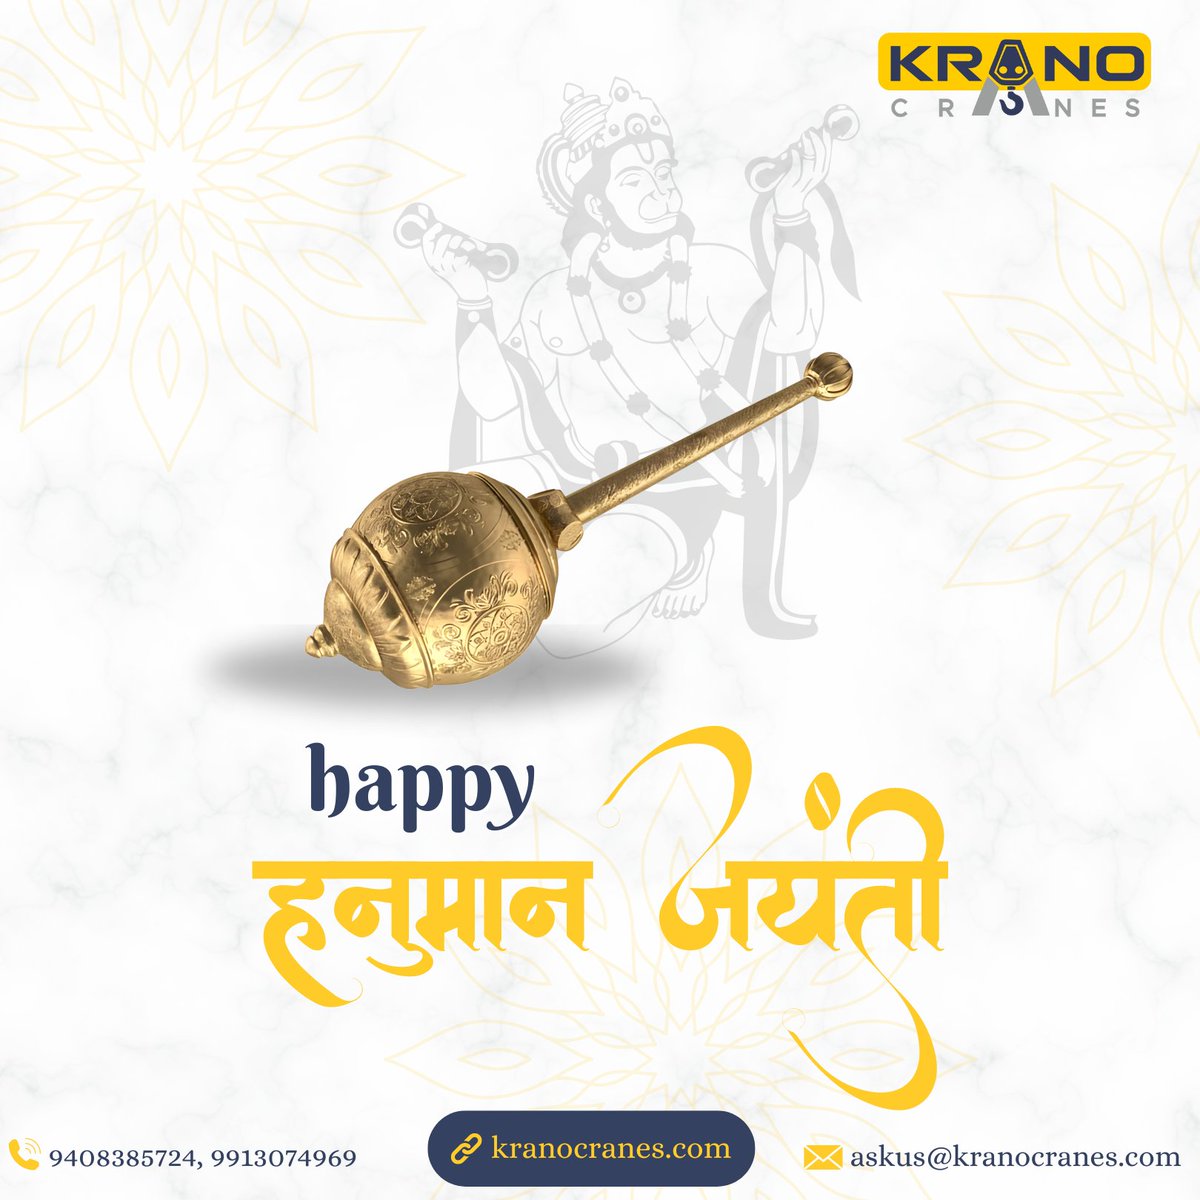 Celebrate the power of faith and service with your loved ones this Hanuman Jayanti. 

Happy Hanuman Jayanti! 

#KranoCranes #HanumanJayanti #MaterialHandling #EOTCranes #OverheadCranes #Hoists #MakeInIndia